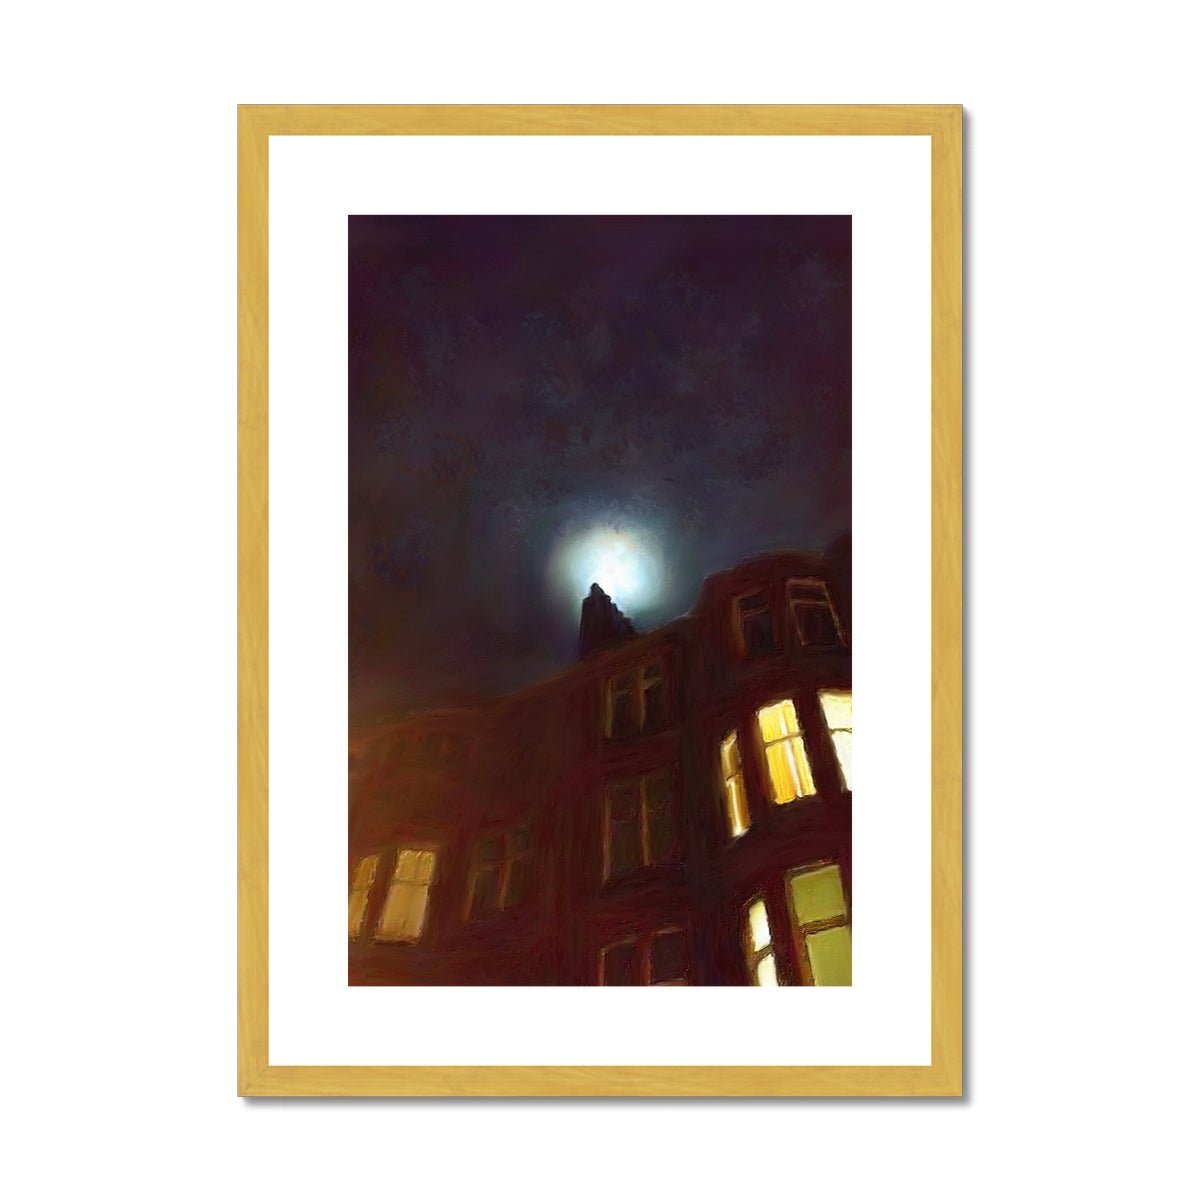 A Moonlit Tenement Painting | Antique Framed & Mounted Prints From Scotland-Antique Framed & Mounted Prints-Edinburgh & Glasgow Art Gallery-A2 Portrait-Gold Frame-Paintings, Prints, Homeware, Art Gifts From Scotland By Scottish Artist Kevin Hunter